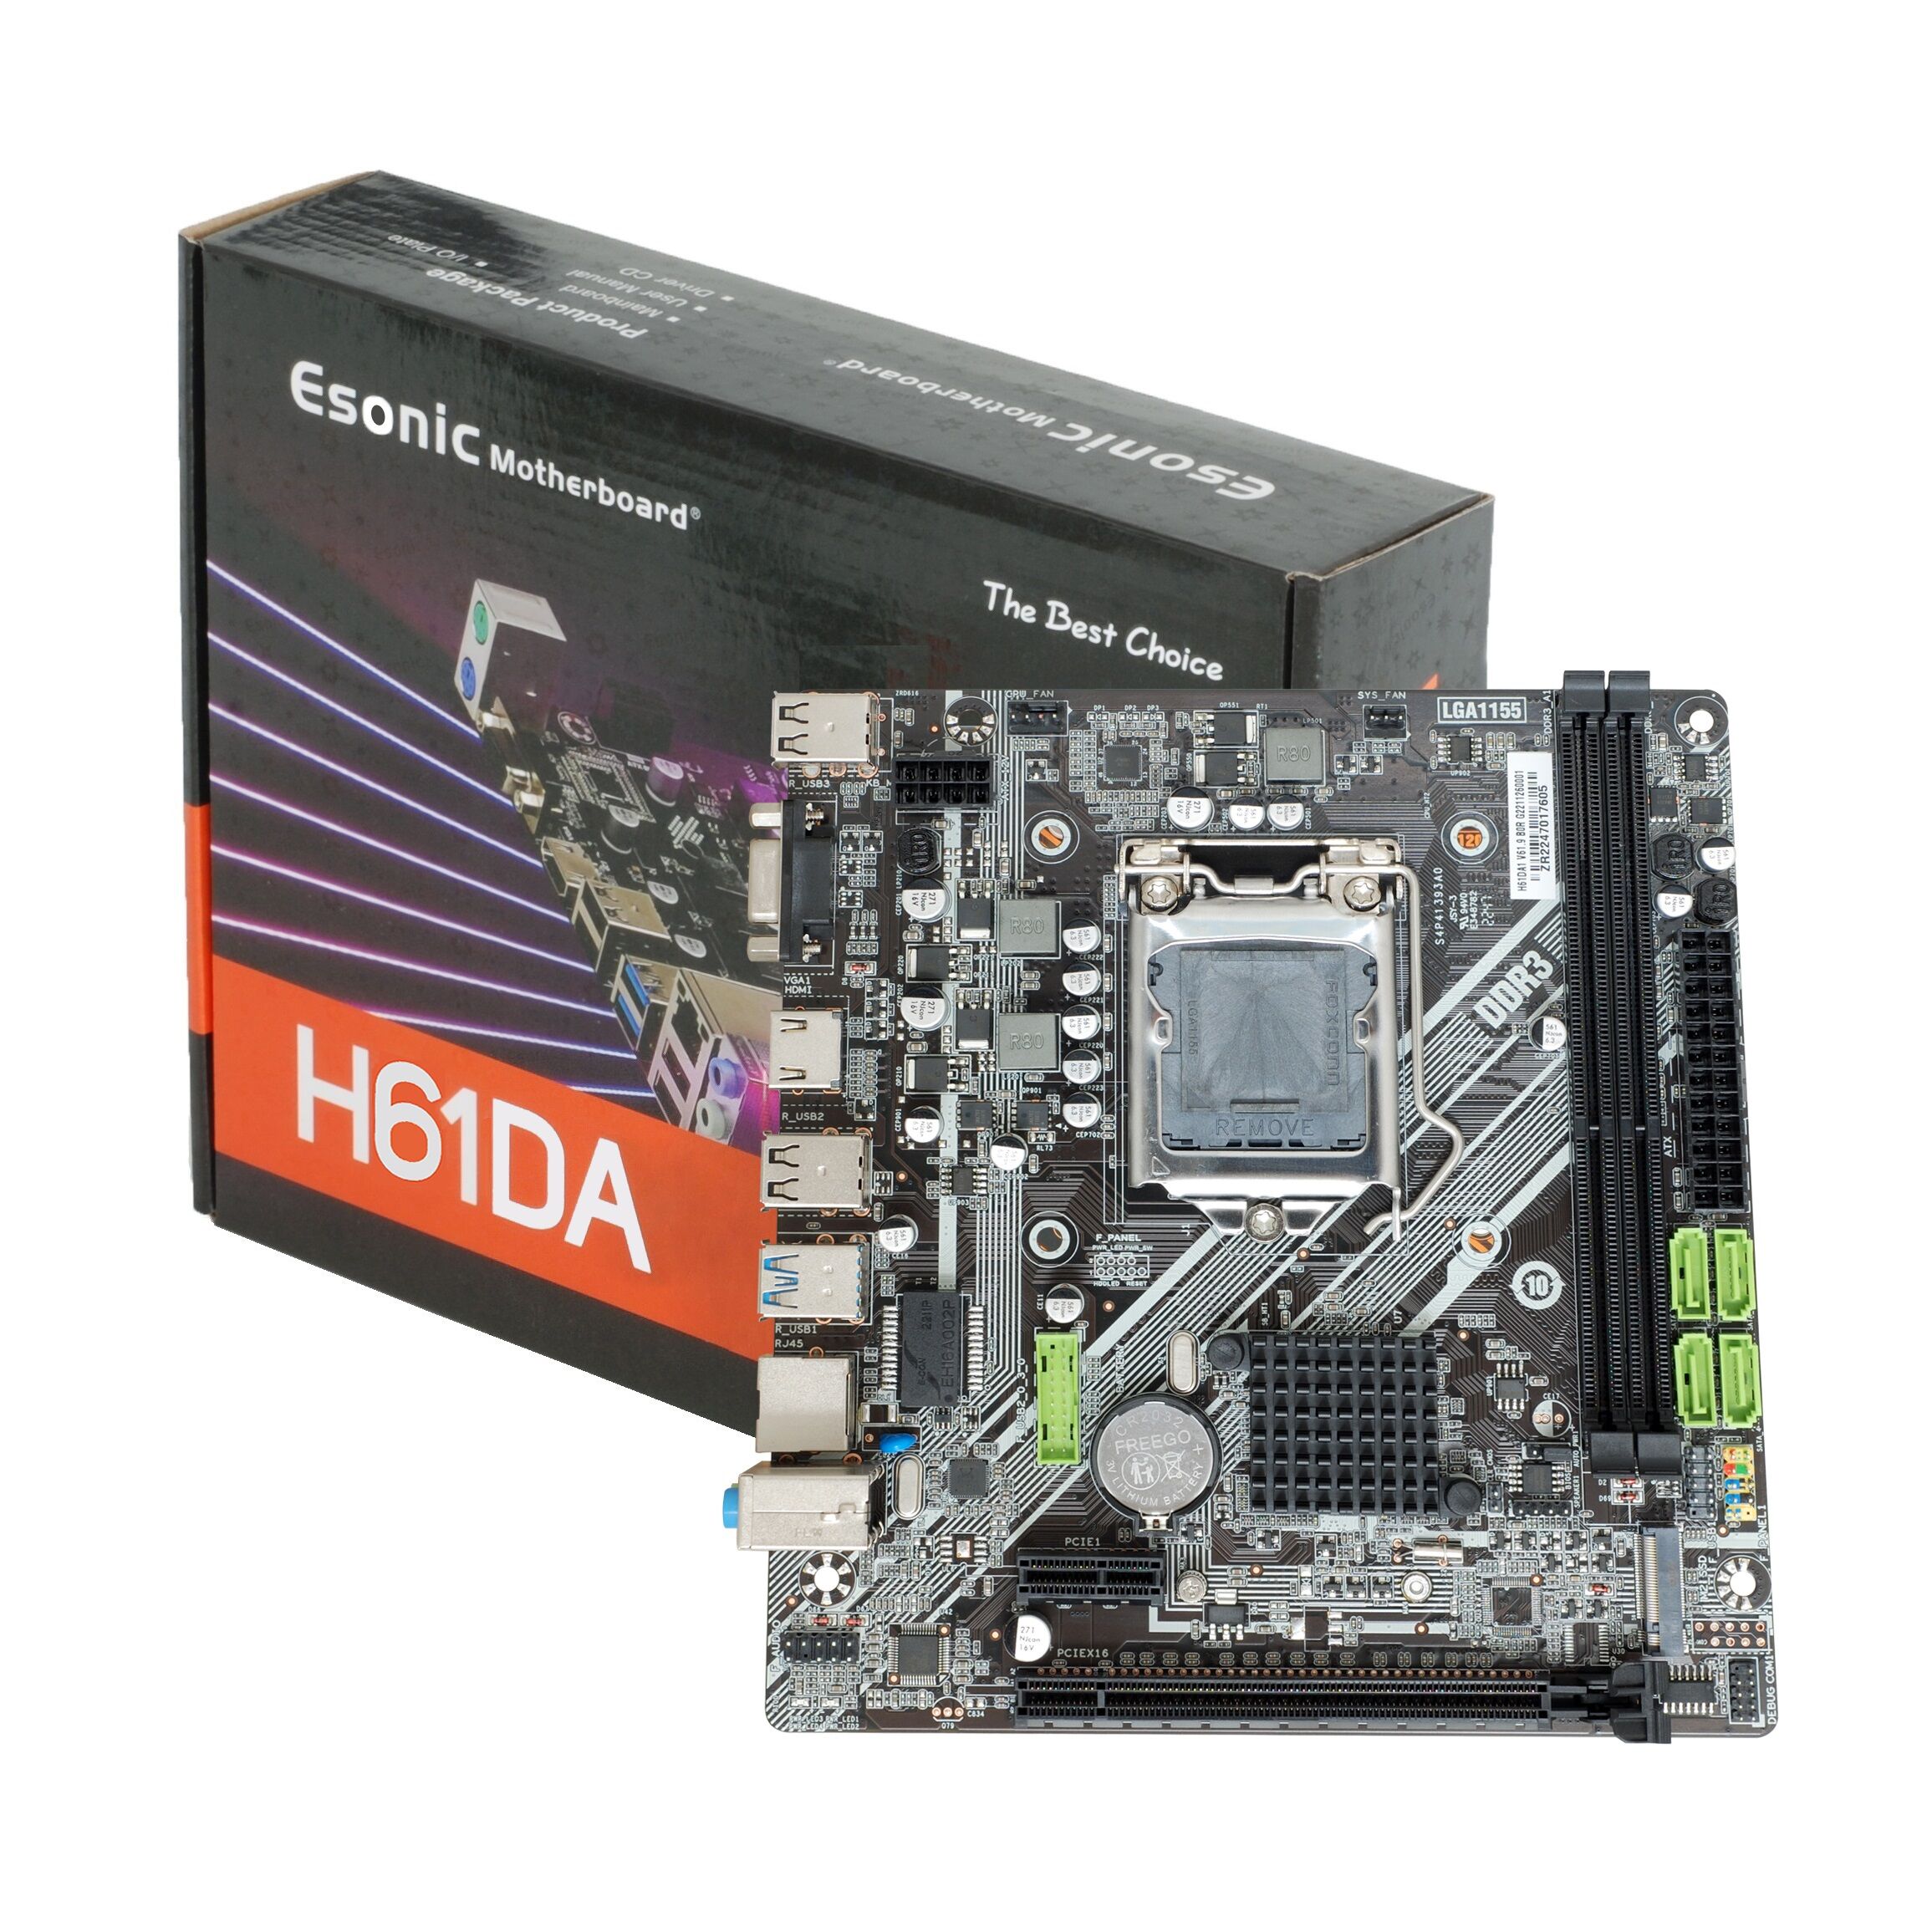 CORE i5 Processor Motherboard For Intel 10th Generation For Sale China